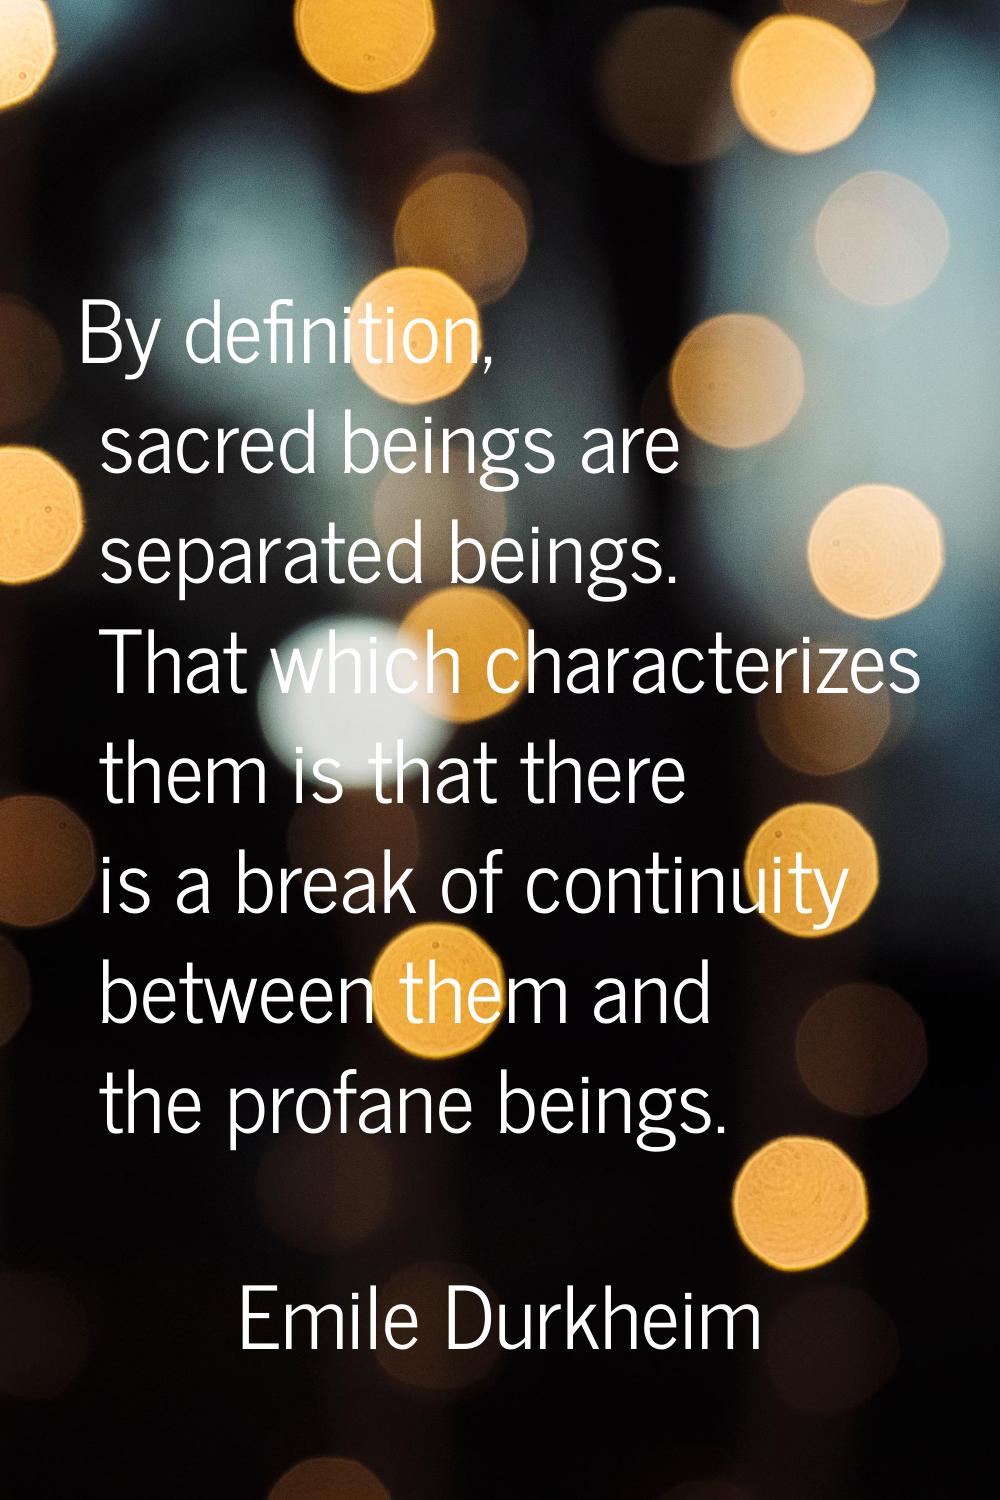 By definition, sacred beings are separated beings. That which characterizes them is that there is a